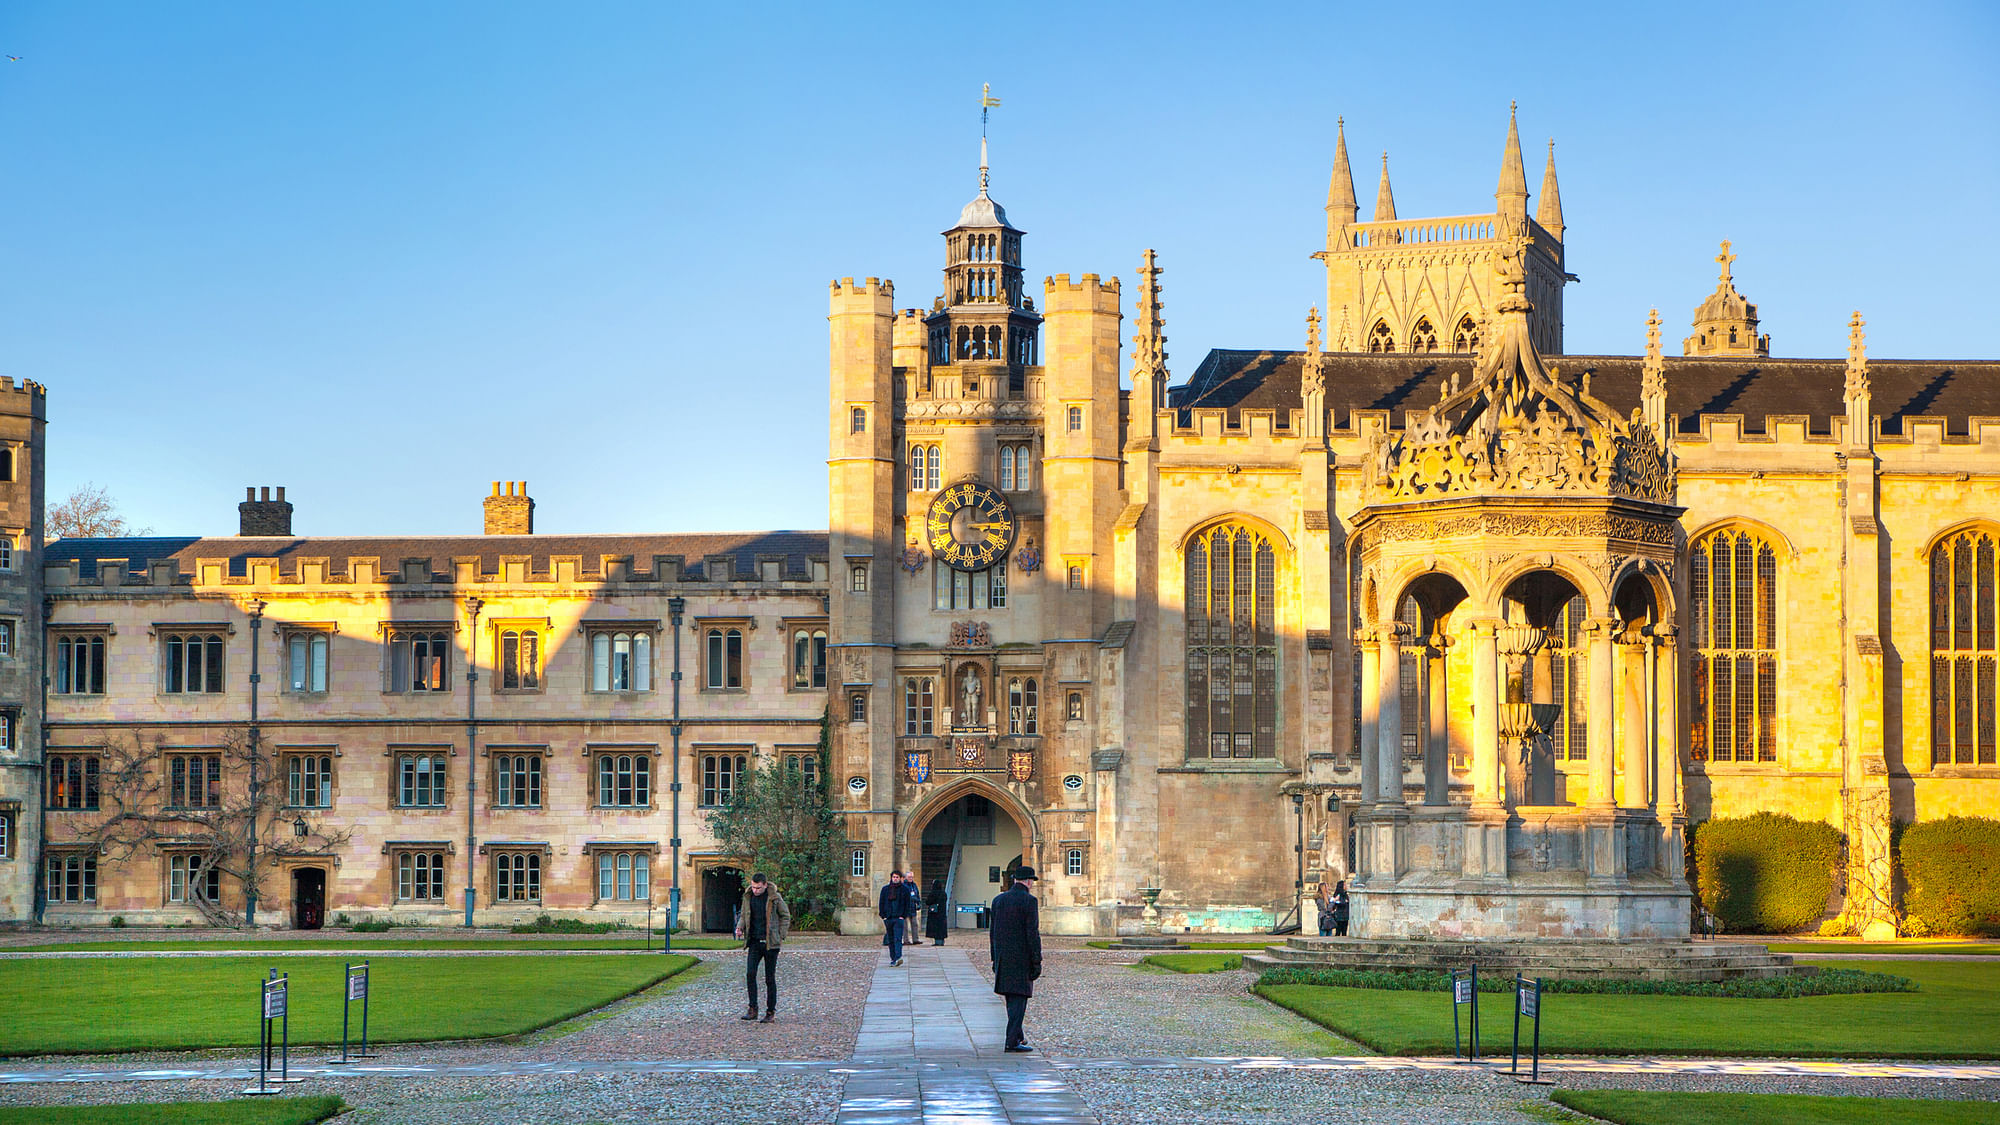 The University of Cambridge has suspended mass lectures for the next academic year.